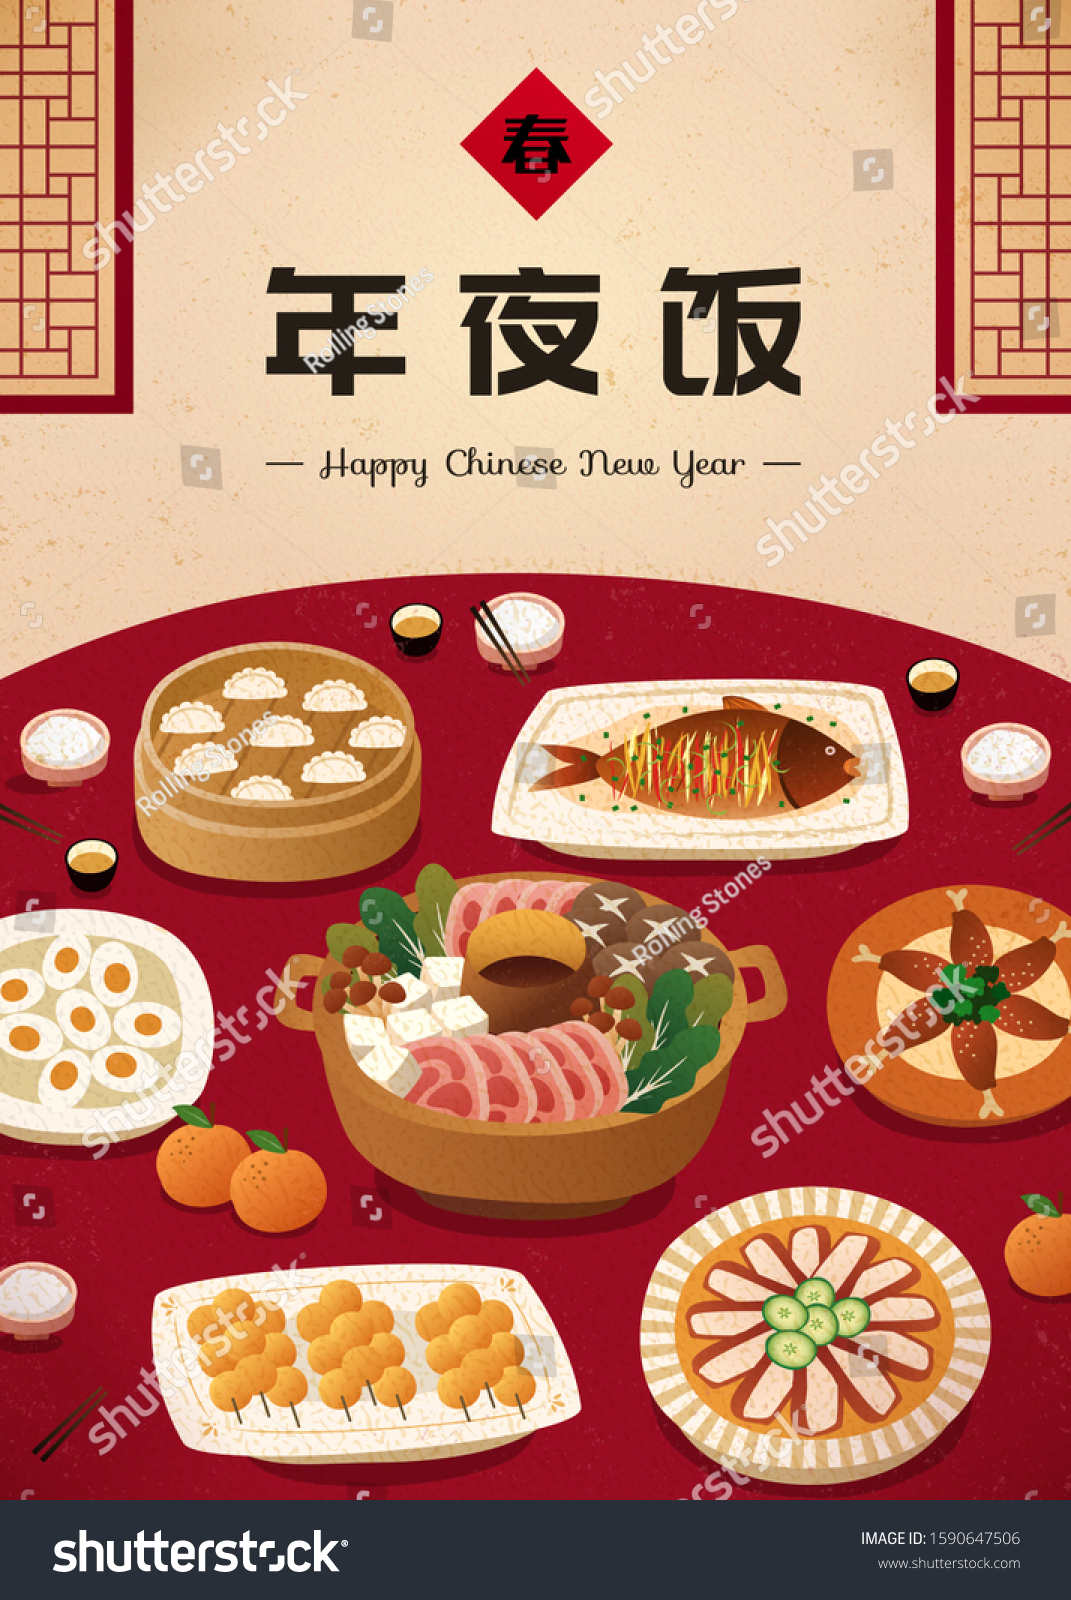 SVG of Delicious home made meal for reunion dinner in flat design, Chinese text translation: reunion dinner svg